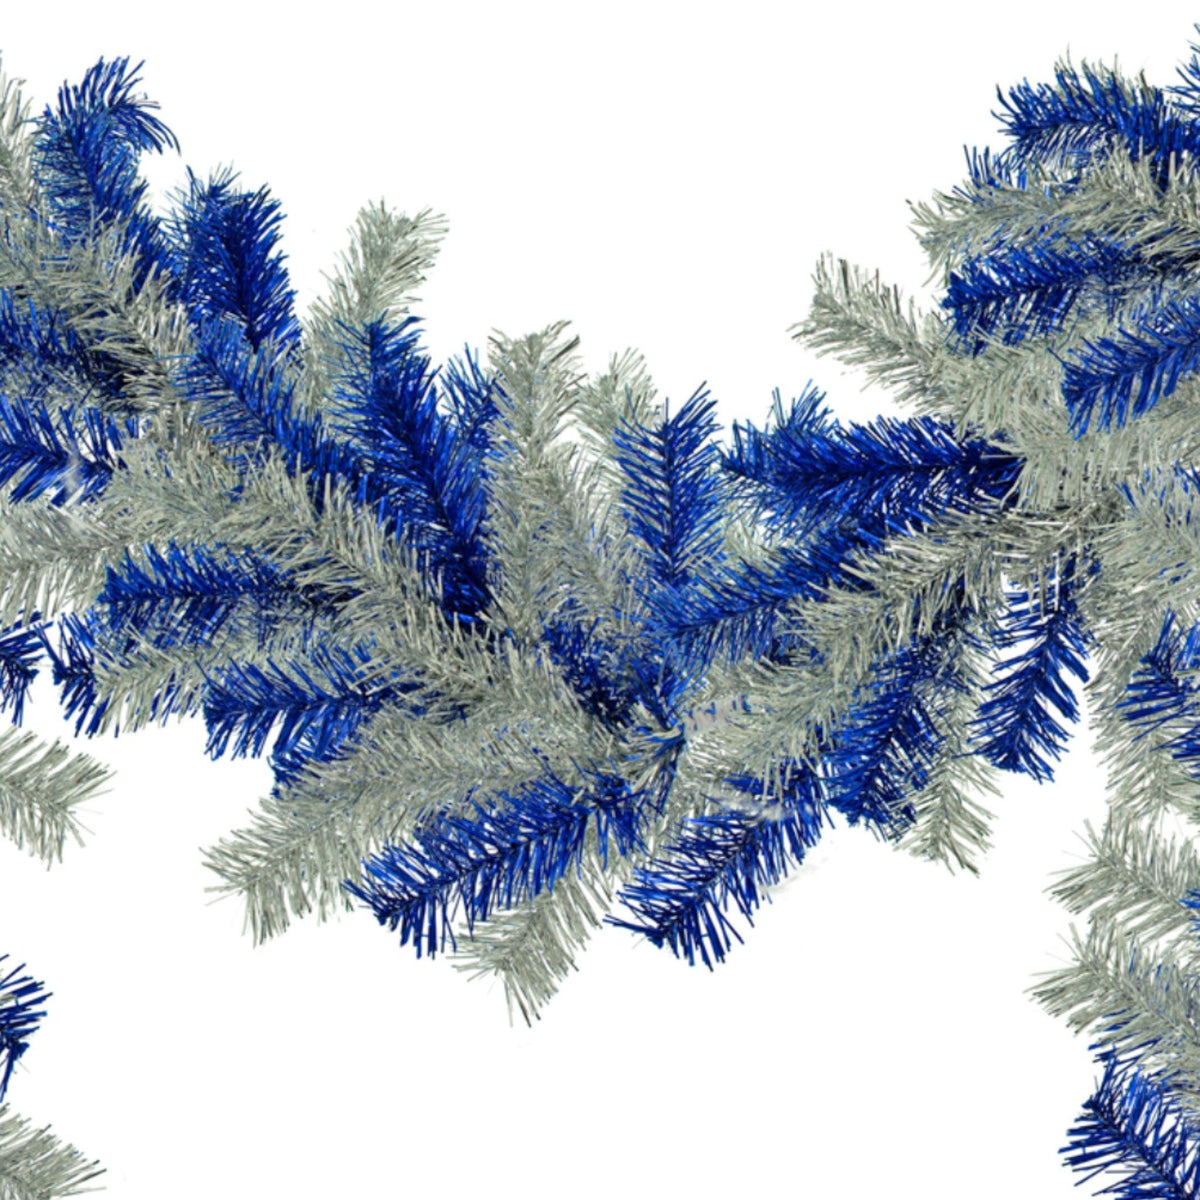 Middle section of Lee Display's 6FT Long Blue and Silver Tinsel Christmas Brush Garland.  Available now at leedisplay.com